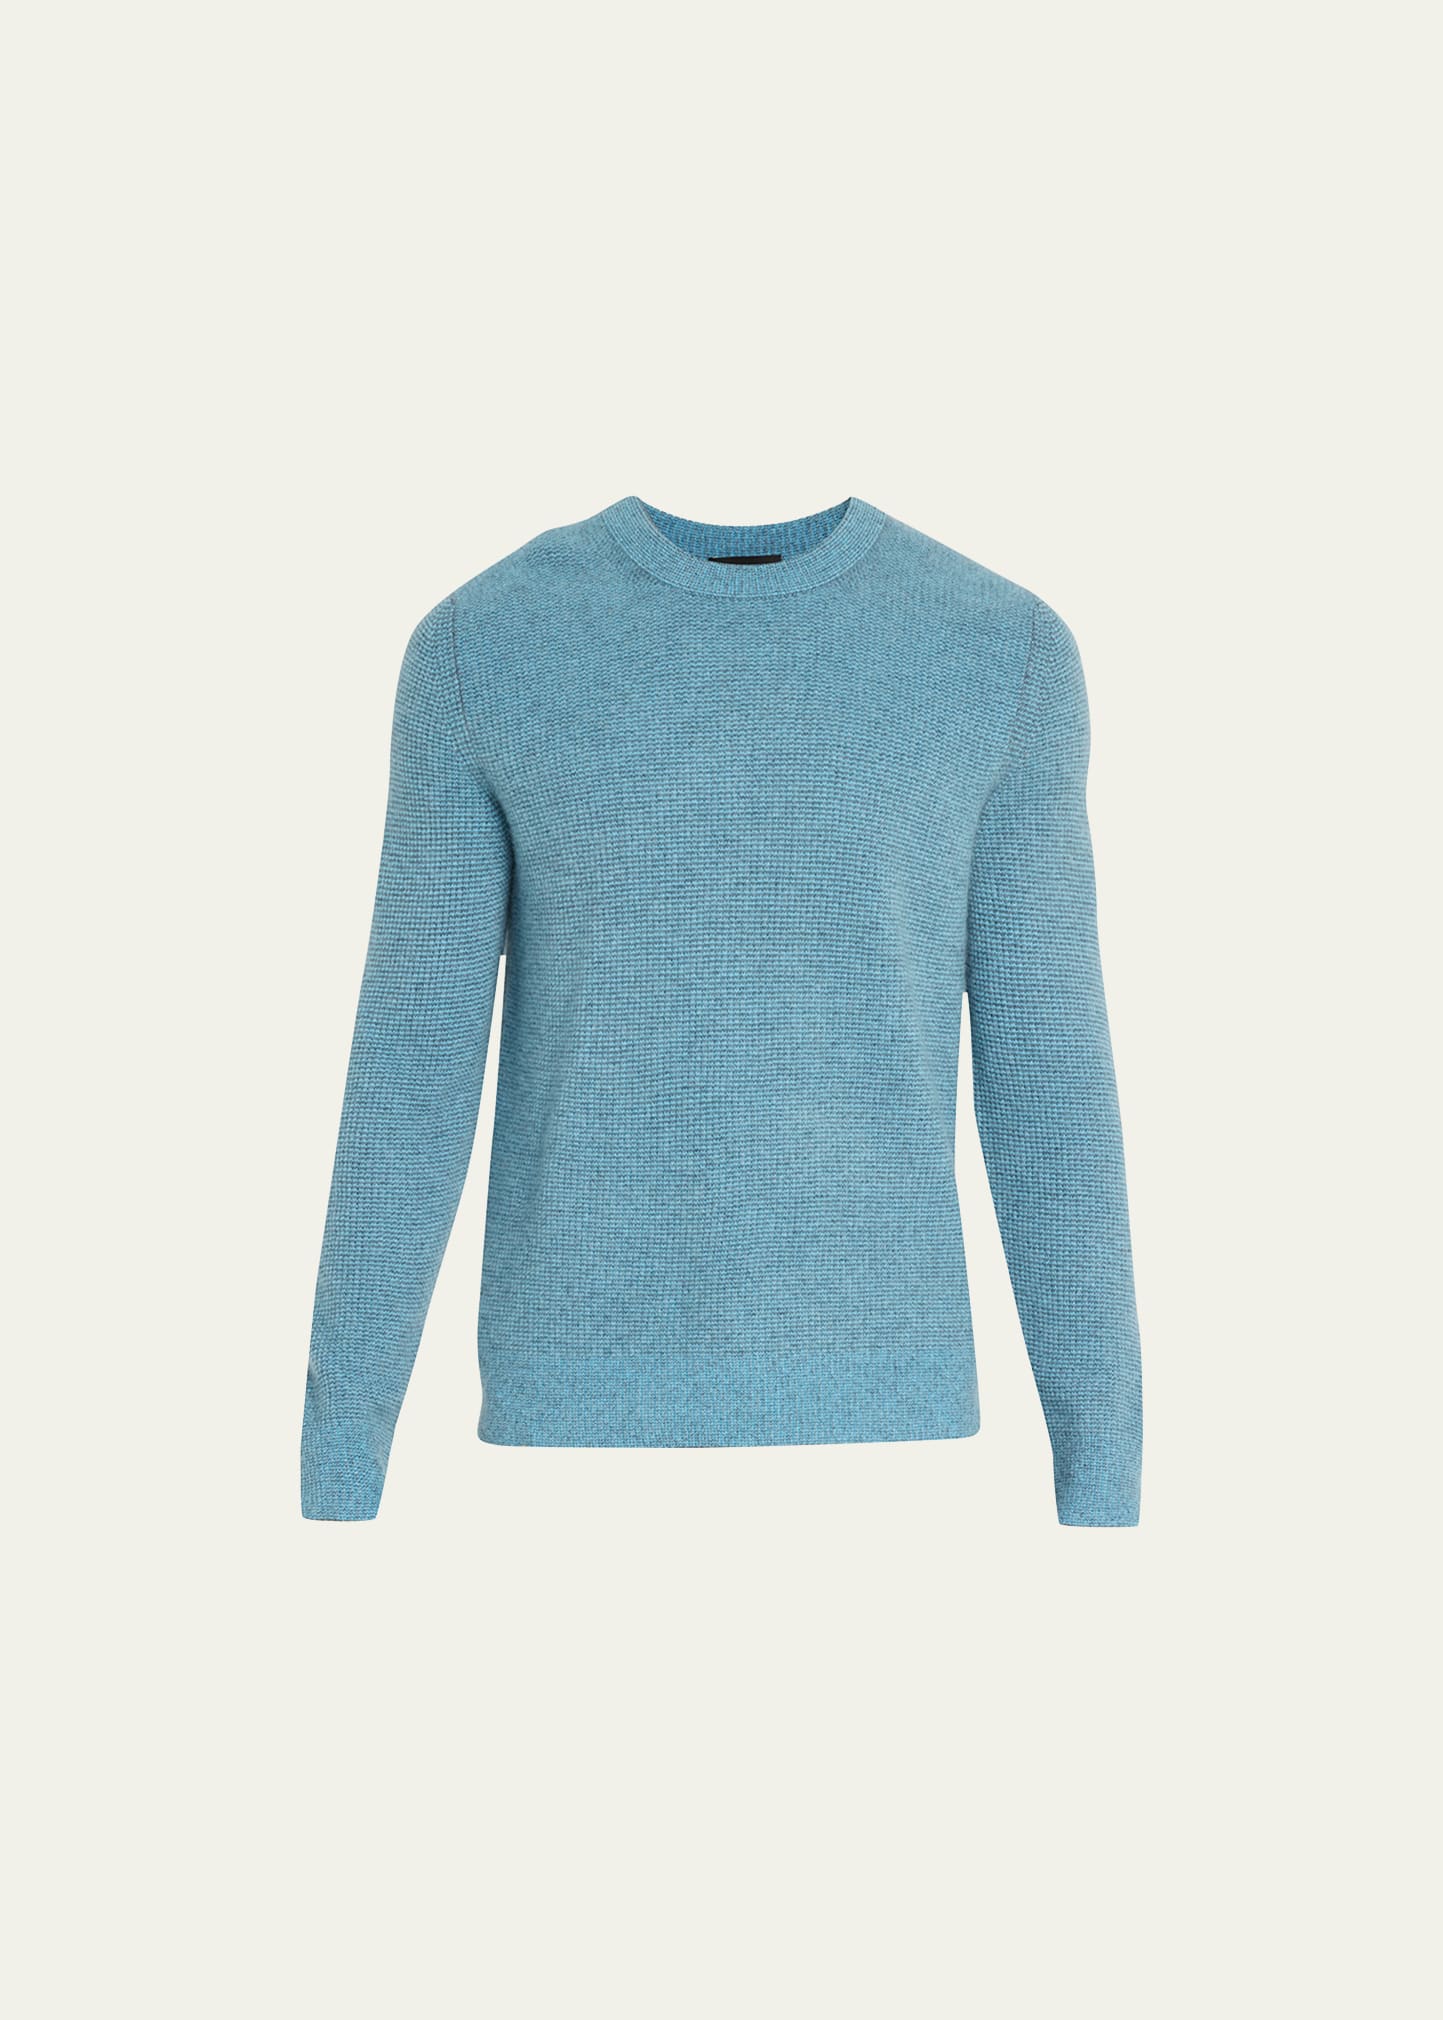 Shop Vince Men's Boiled Cashmere Thermal Sweater In Fountain Combo